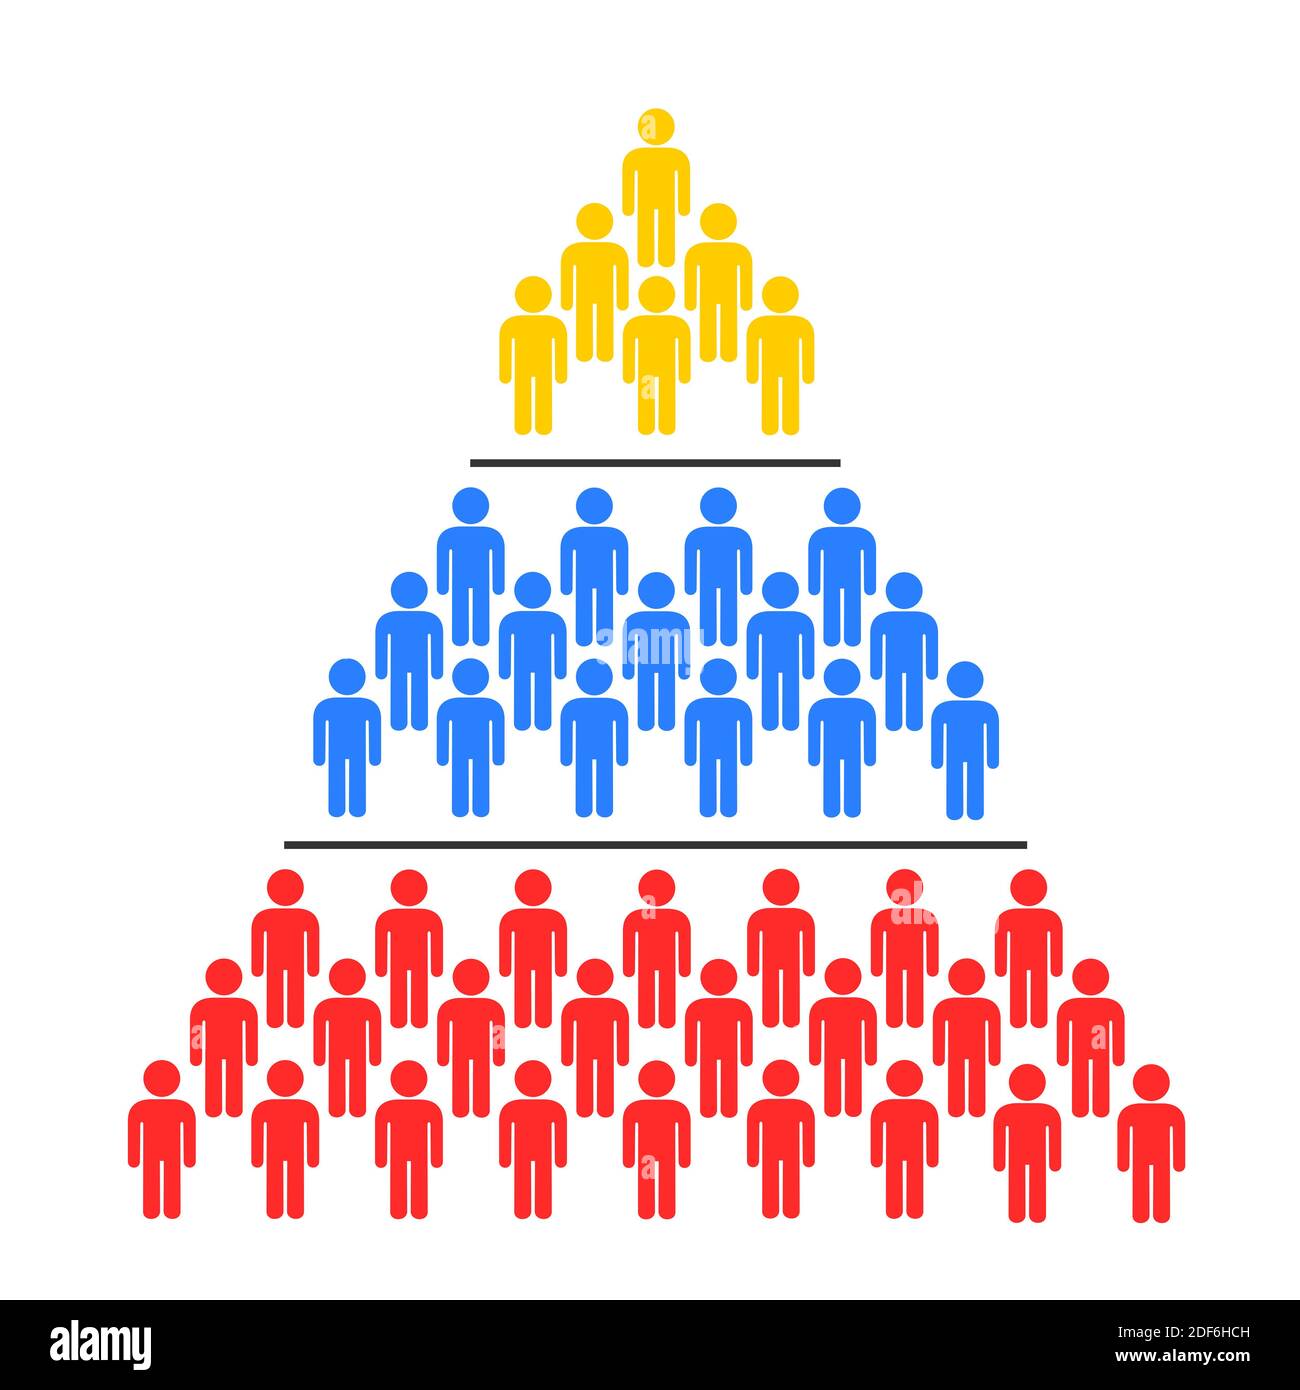 Social stratification - Vertical hiercarchy in the society - upper, midlle and lower classes and castes as inferiorty and superiority. Inferior / supe Stock Photo